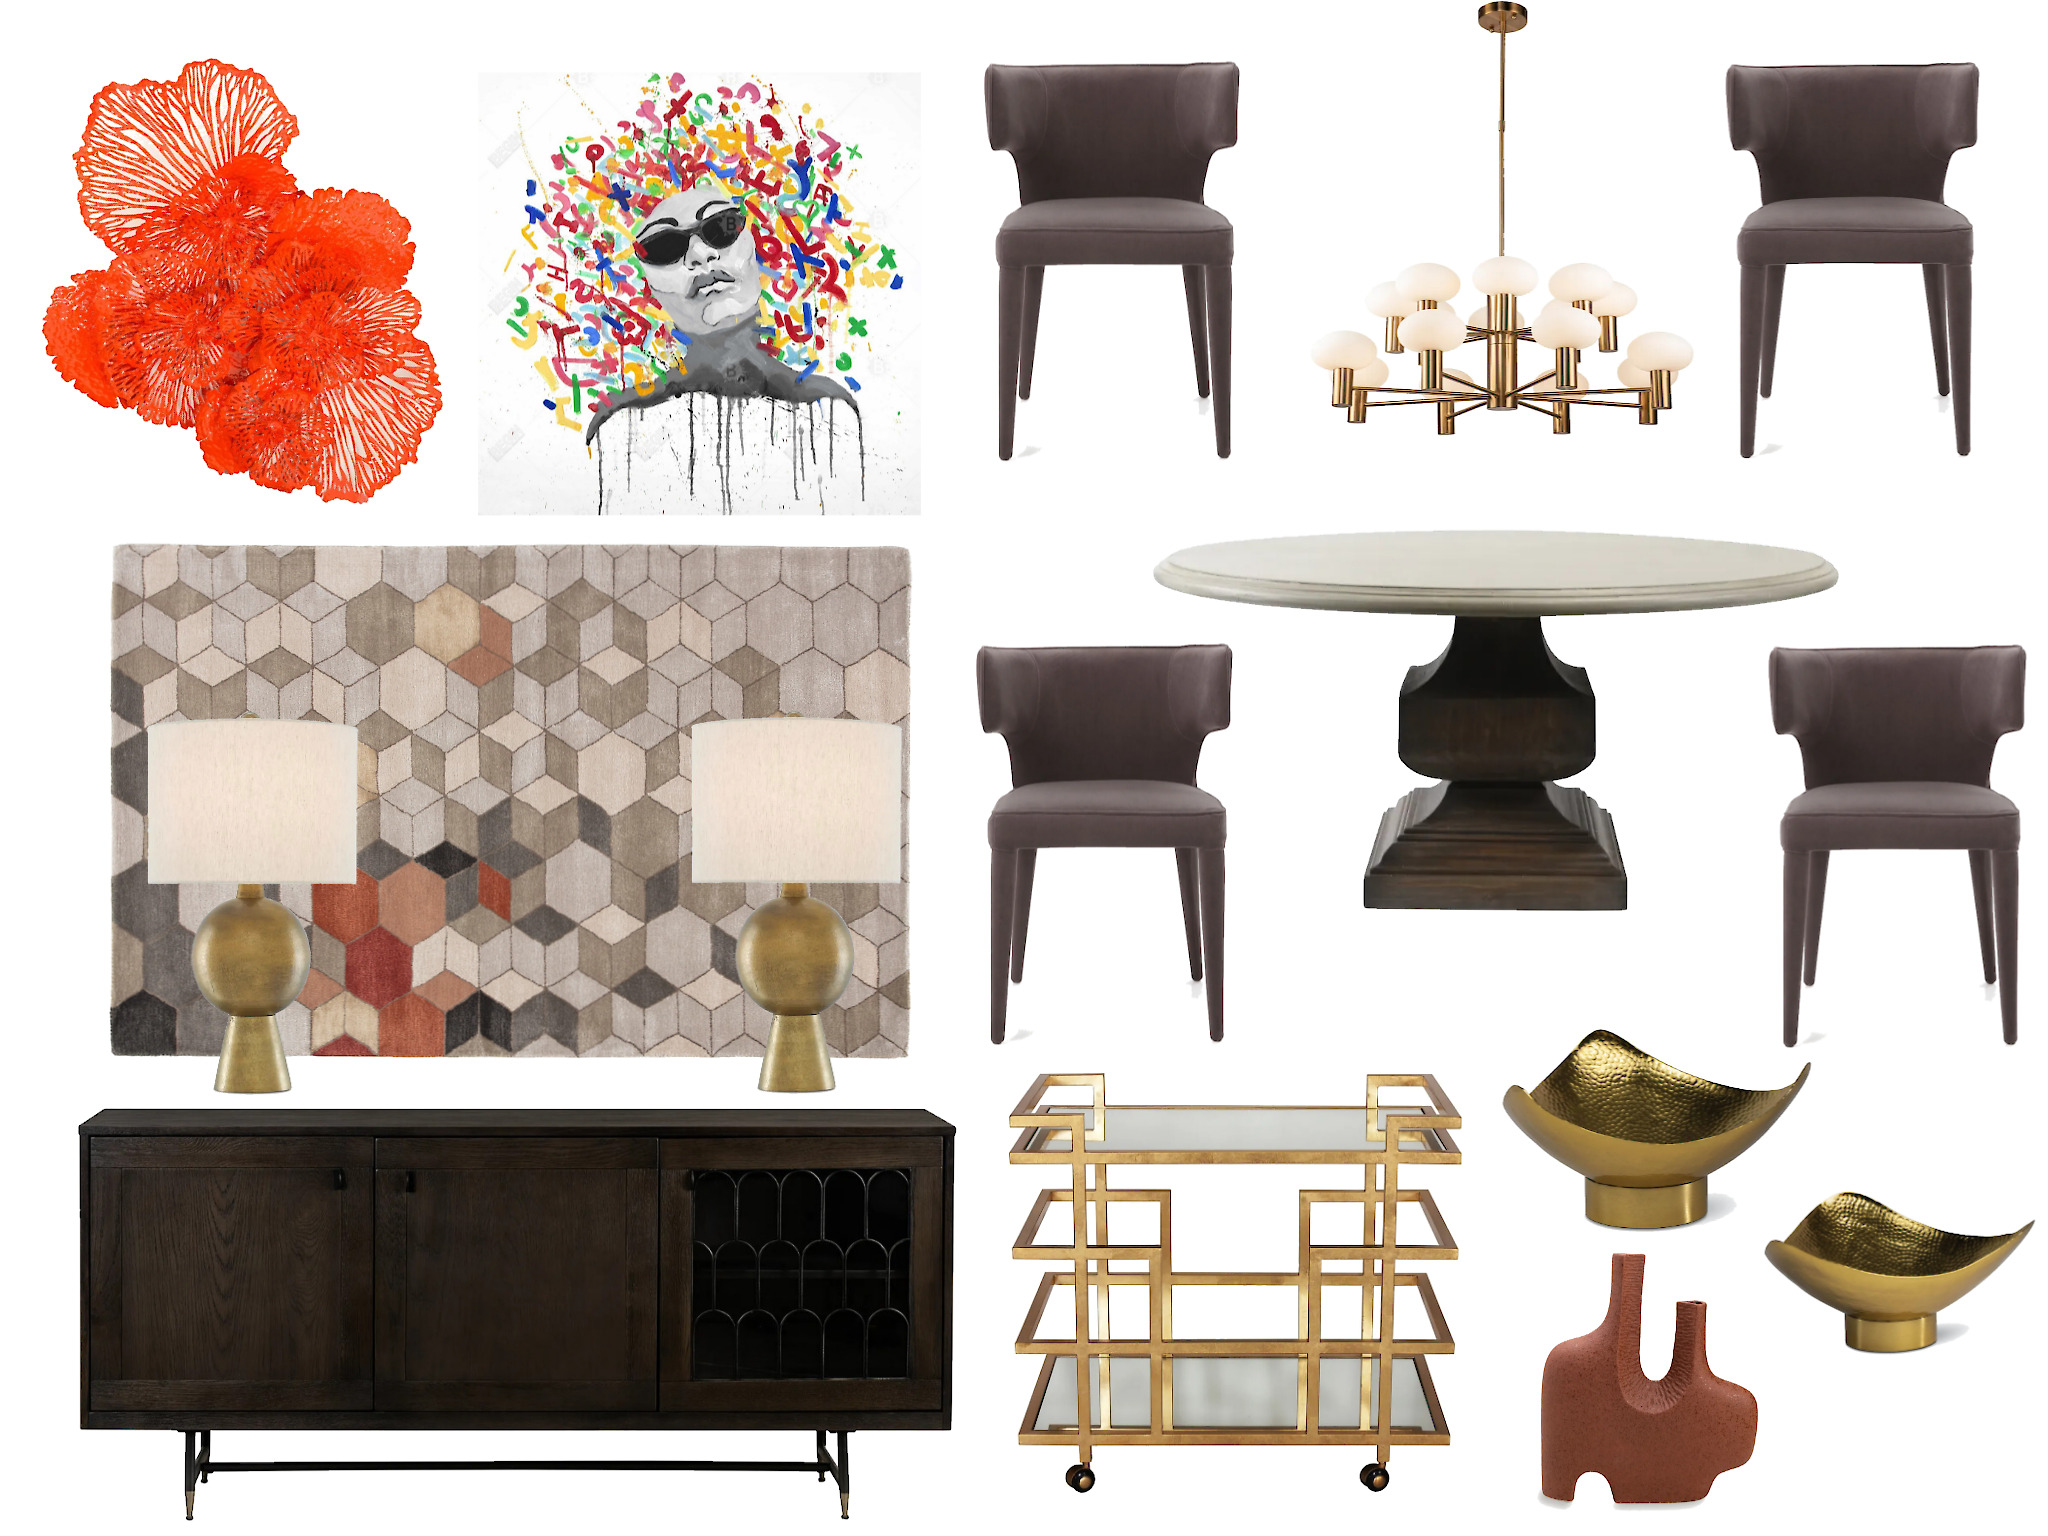 Modern and Energetic Dining Room Moodboard